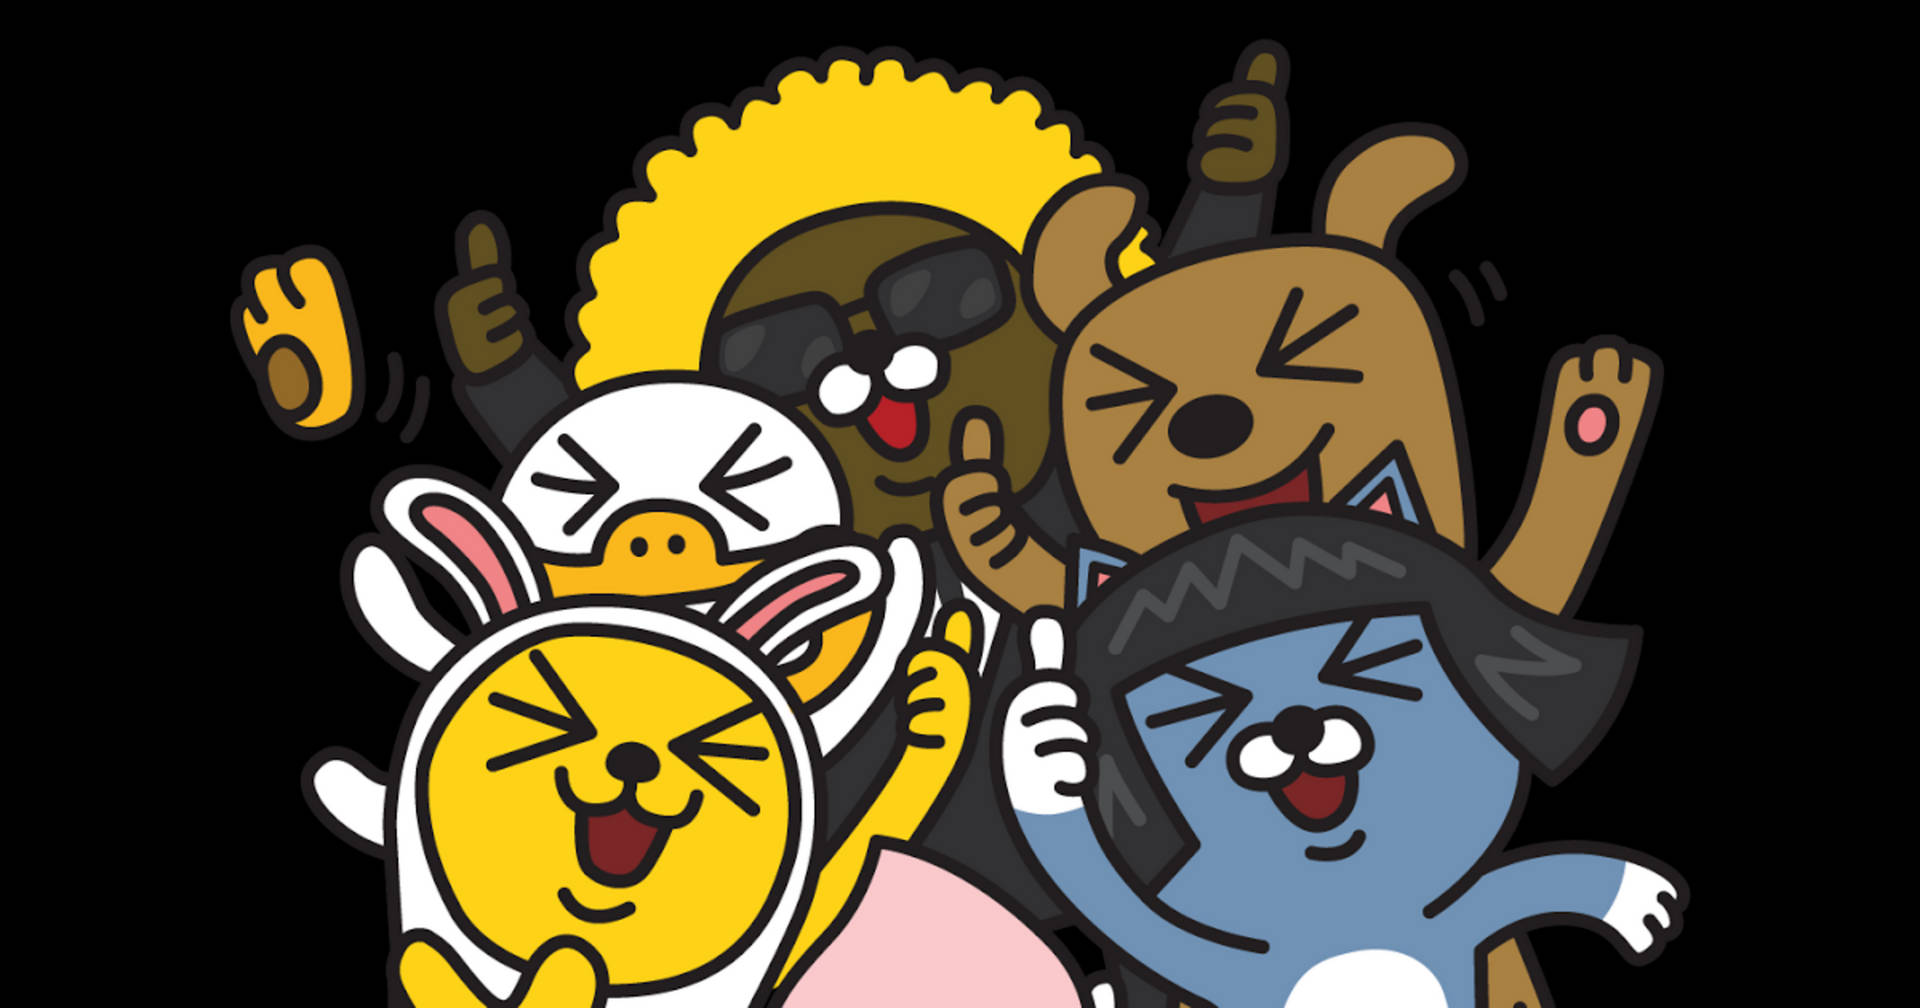 Let's Give A Thumbs Up To Kakao Friends!